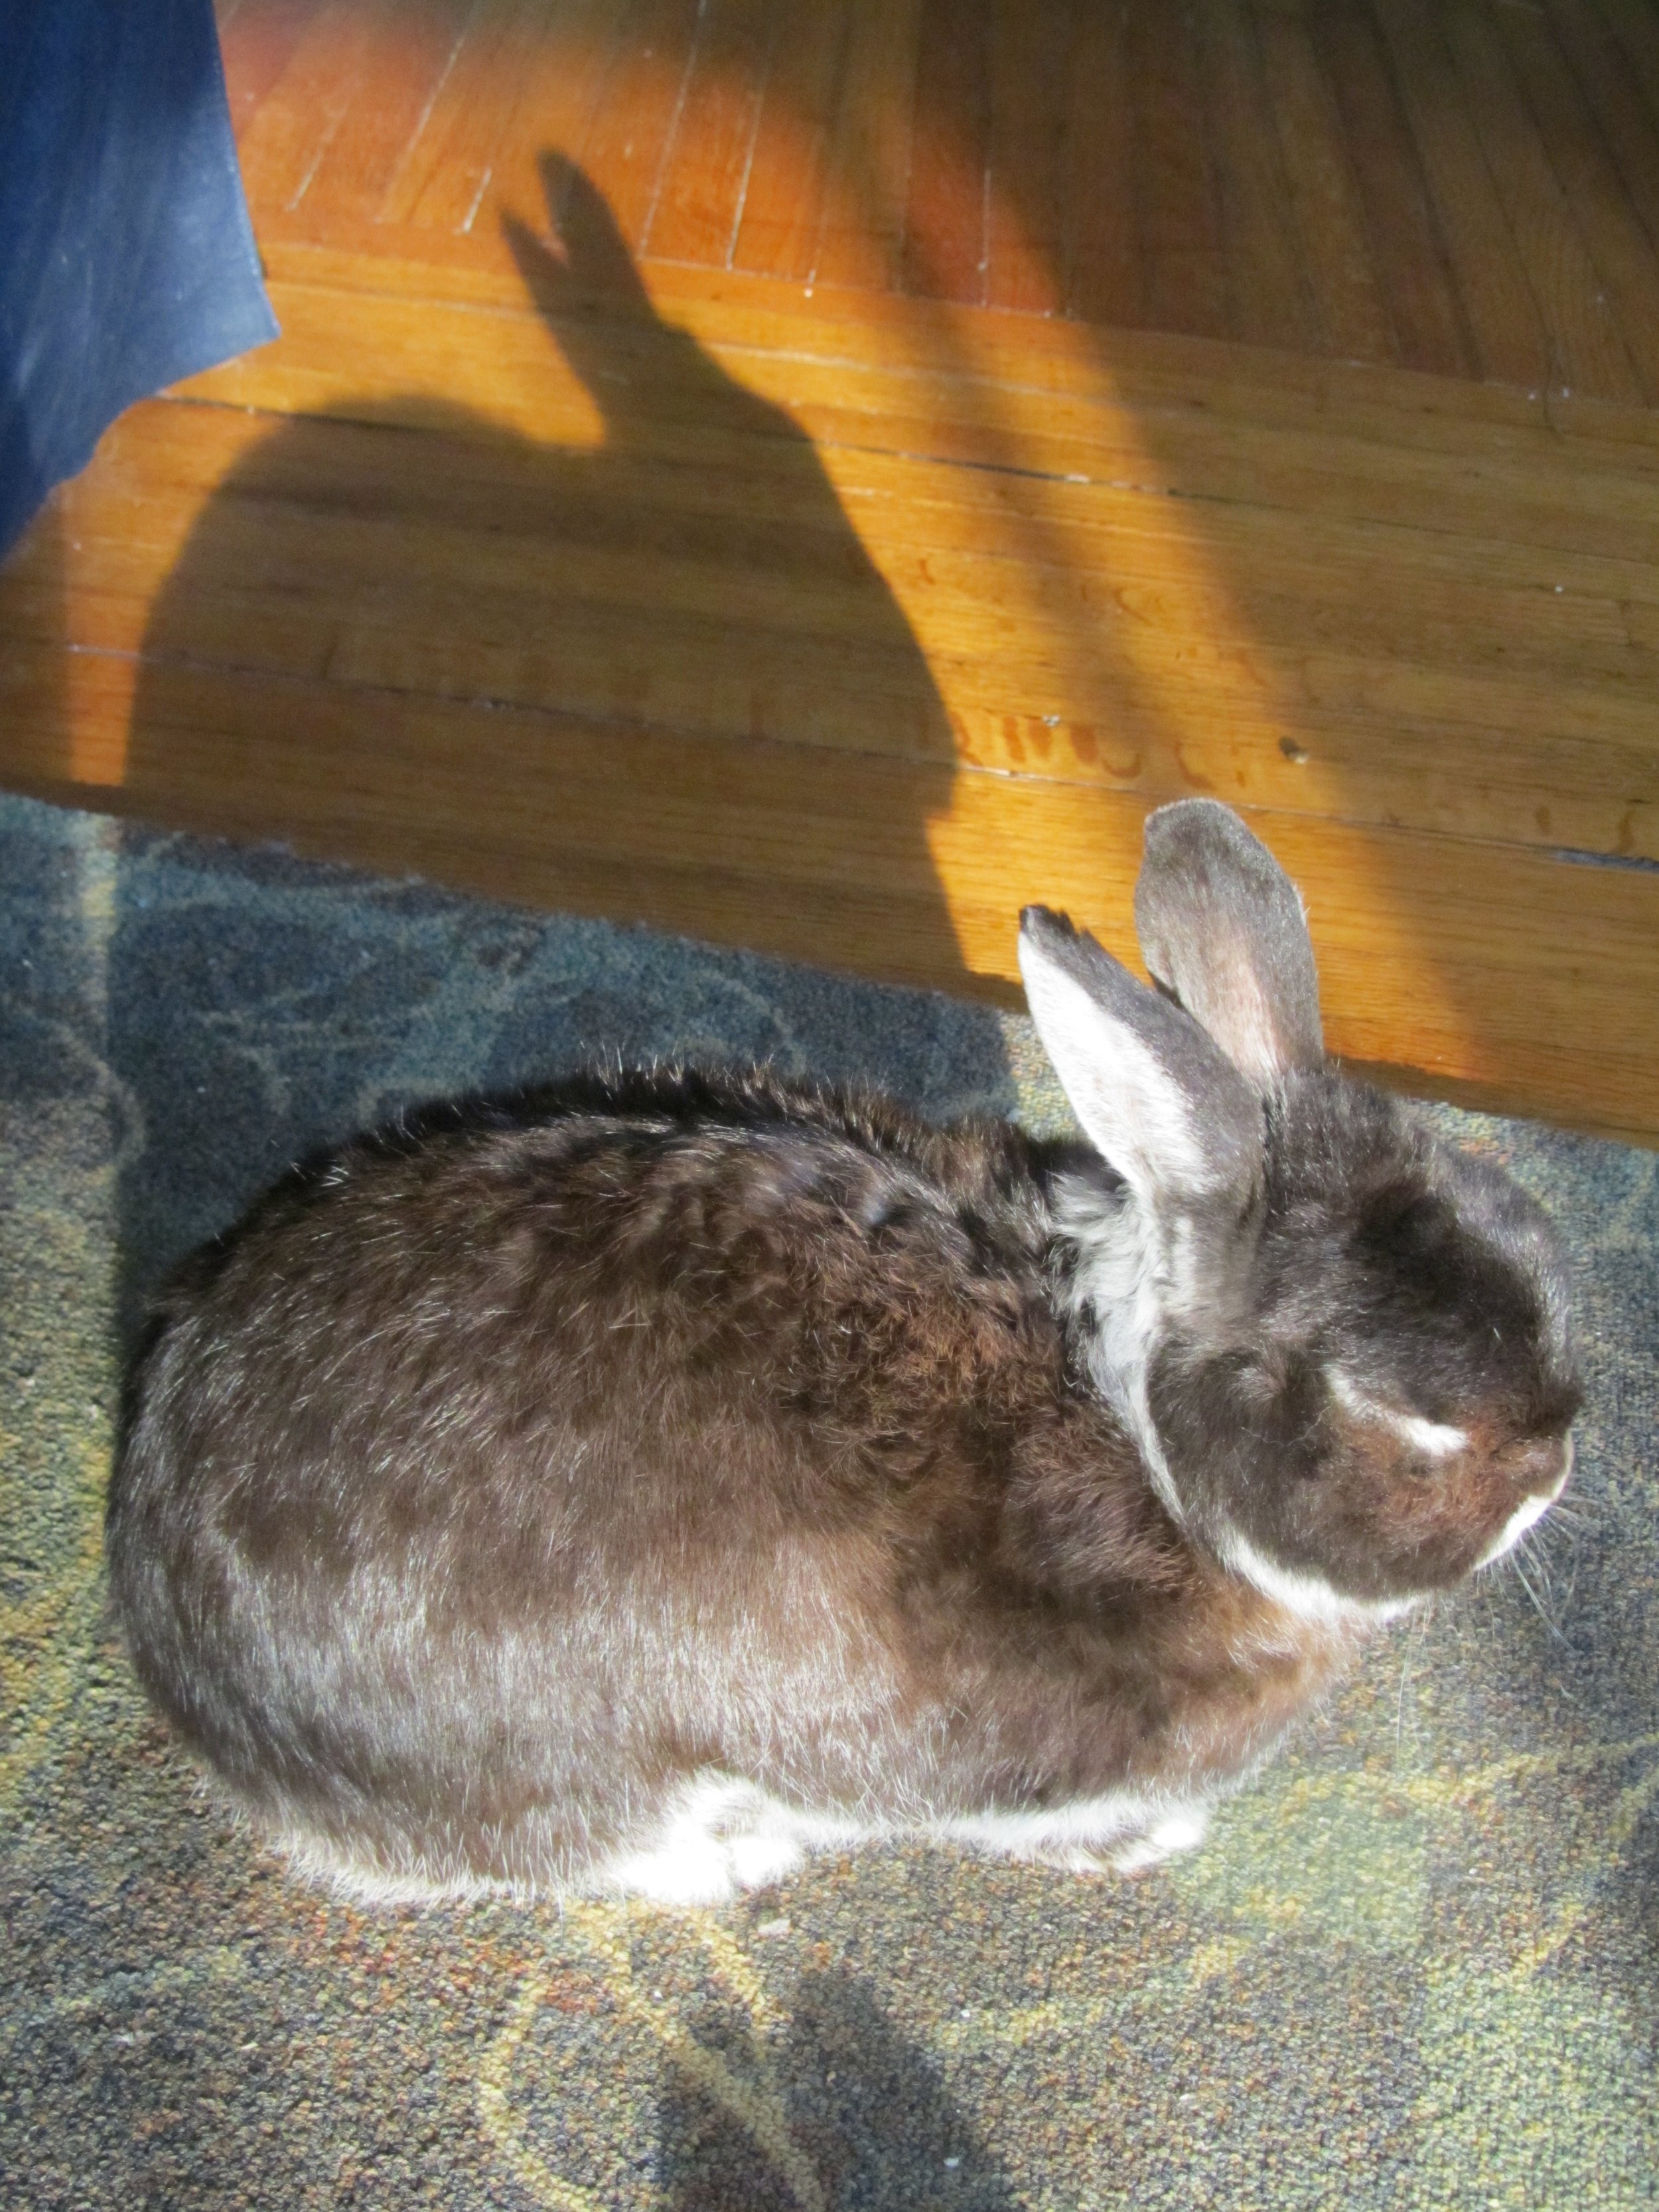 A Very Small Bunny Can Cast a Very Large Shadow